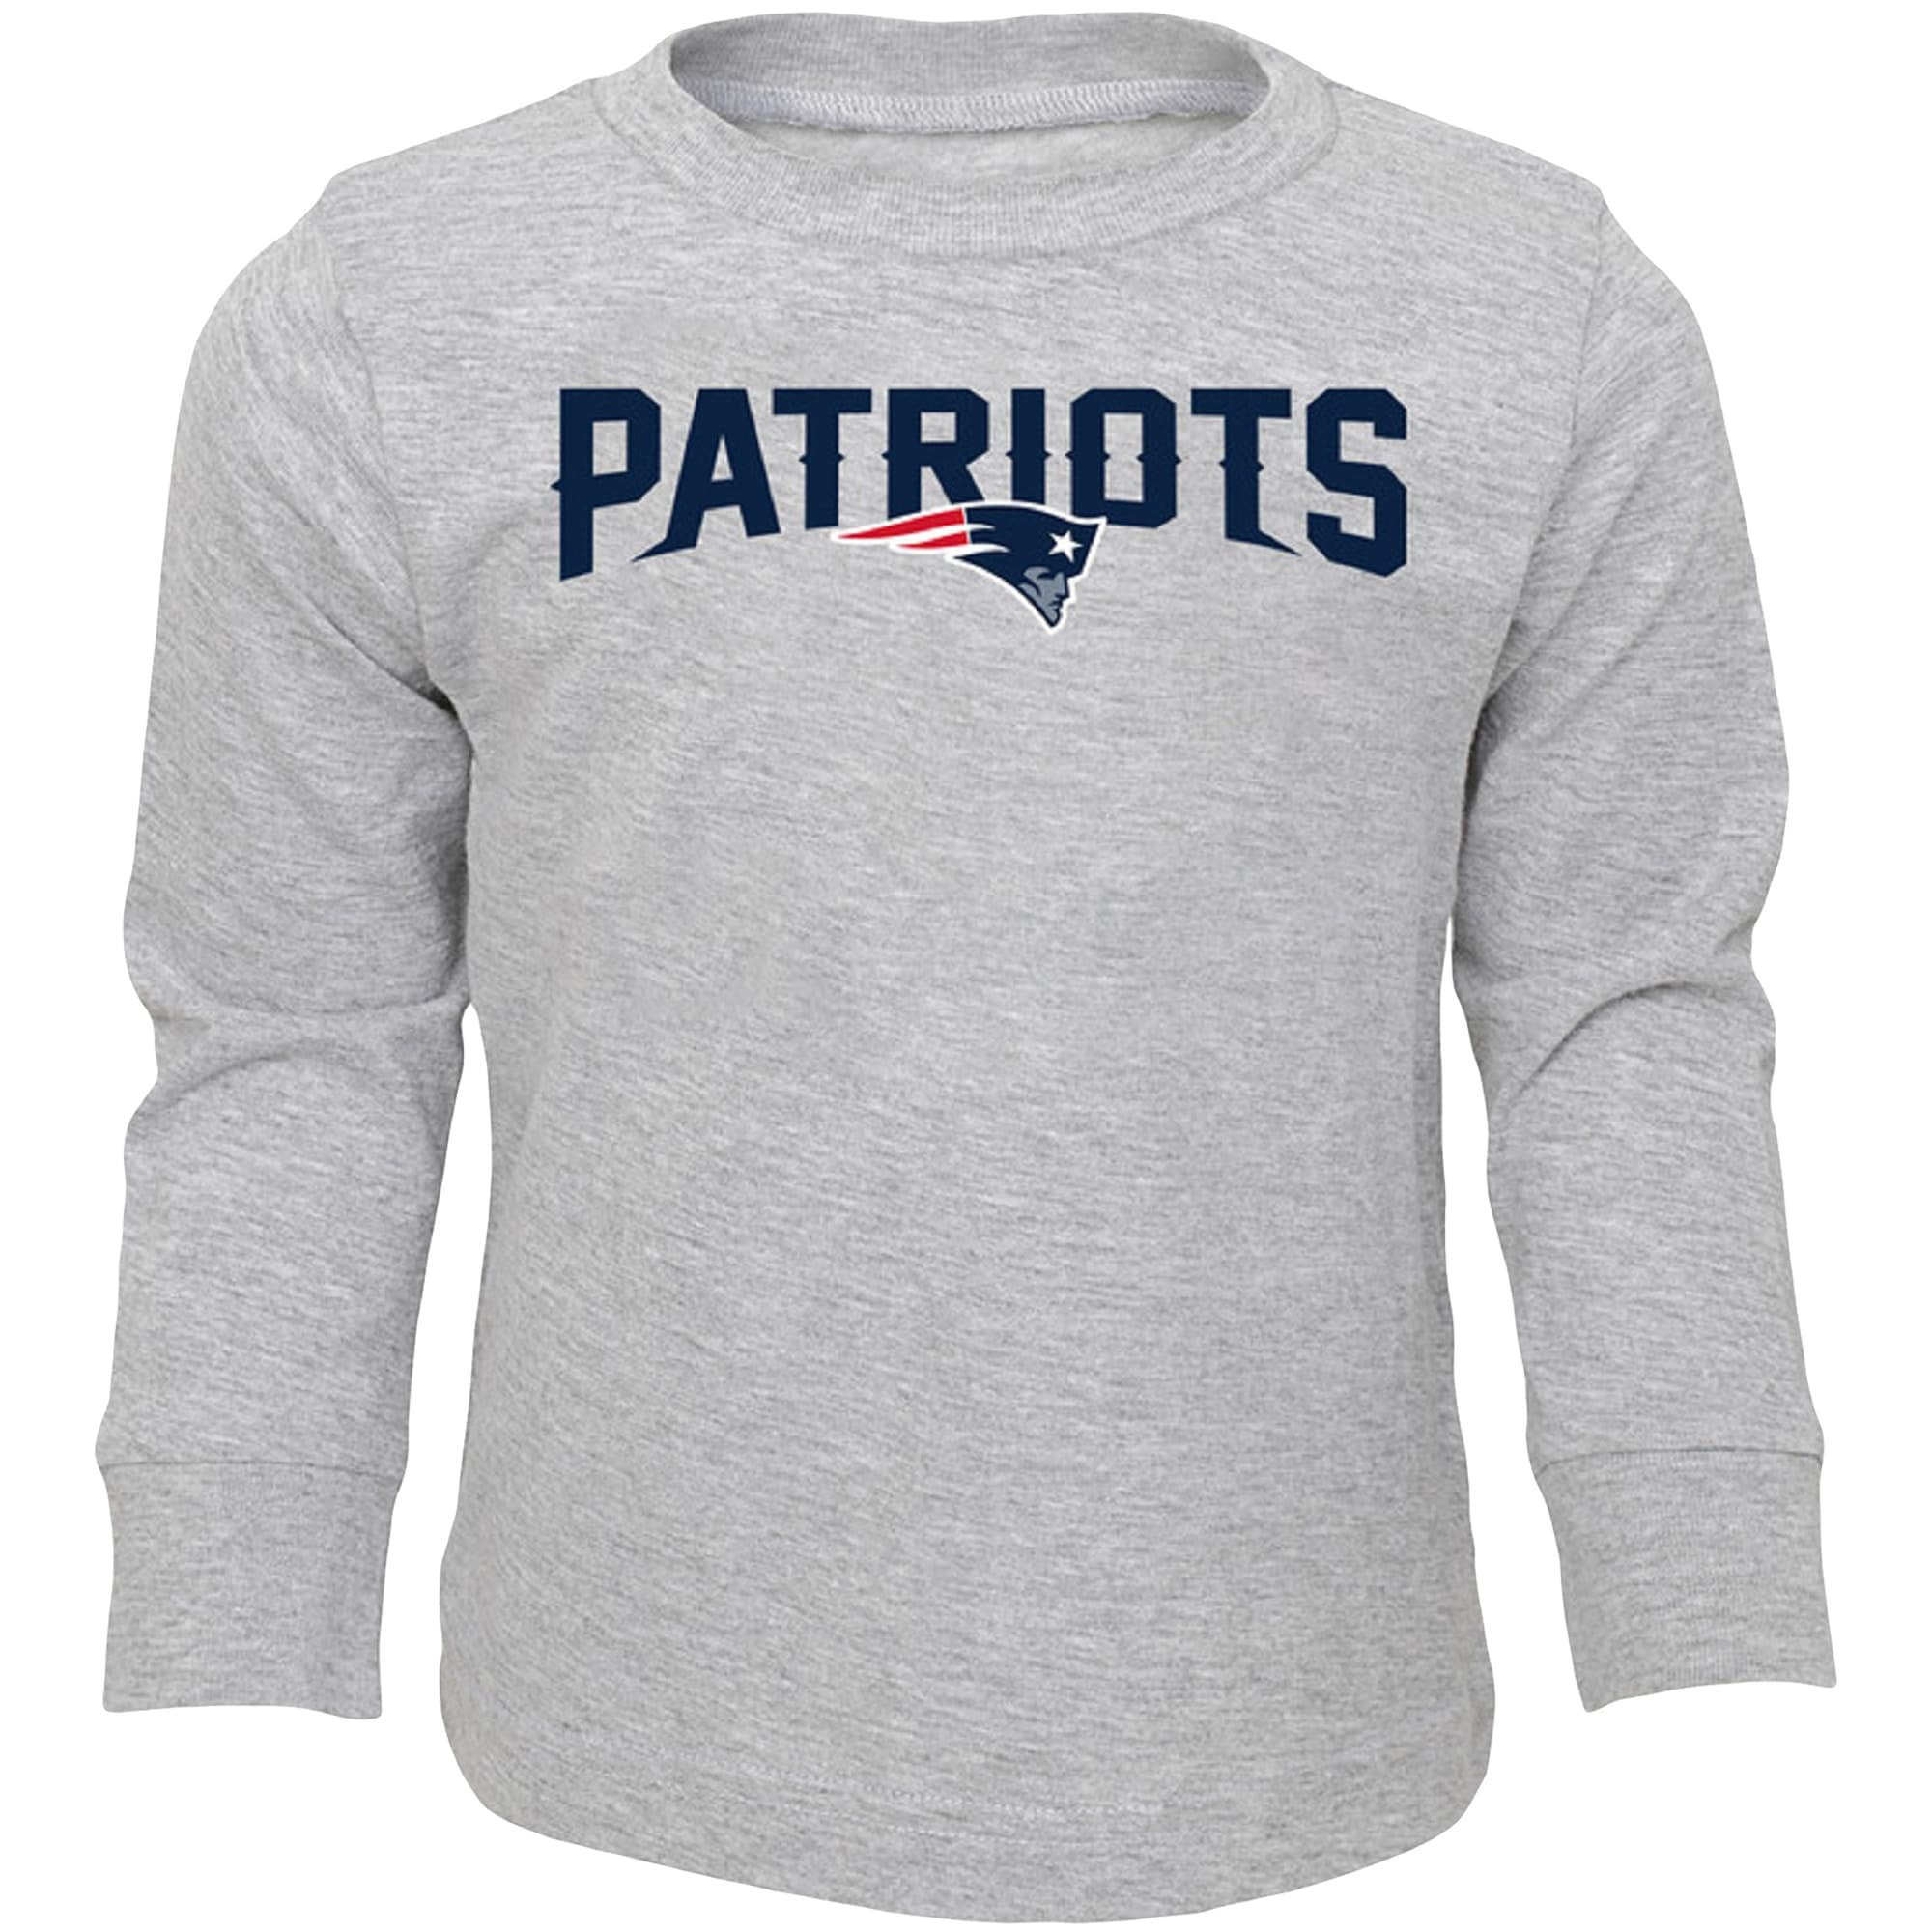 Outerstuff New England Patriots Youth Boys 4-18 Red Heathered Raglan Long Sleeve T-Shirt 